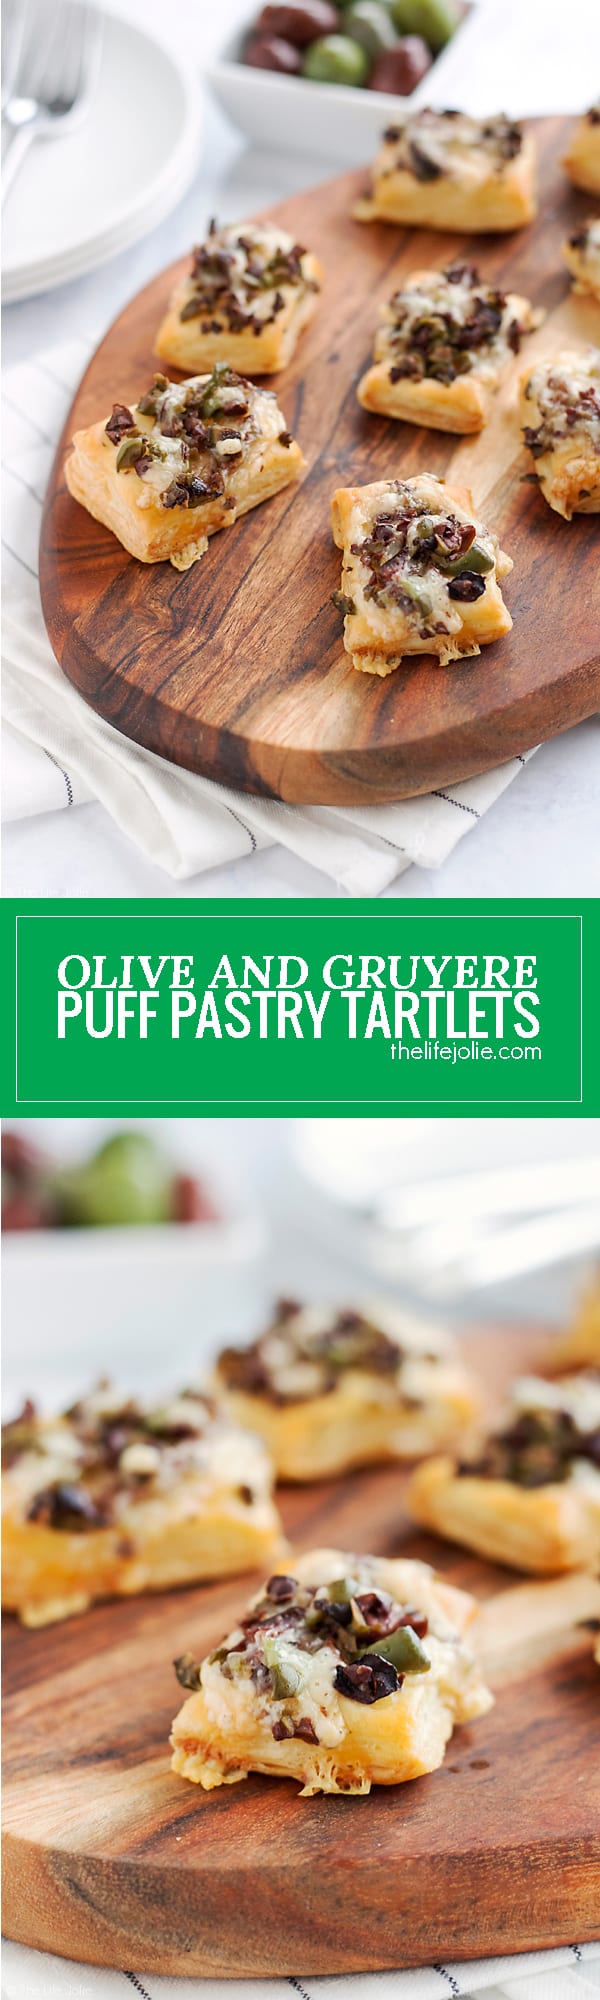 This Olive and Gruyere Puff Pastry Tartlets recipe is one of my new favorite easy appetizers to throw together! Just four simple ingredients (including frozen puff pastry dough, olives and cheese) and they come together quickly for the holidays or any parties you may be having!